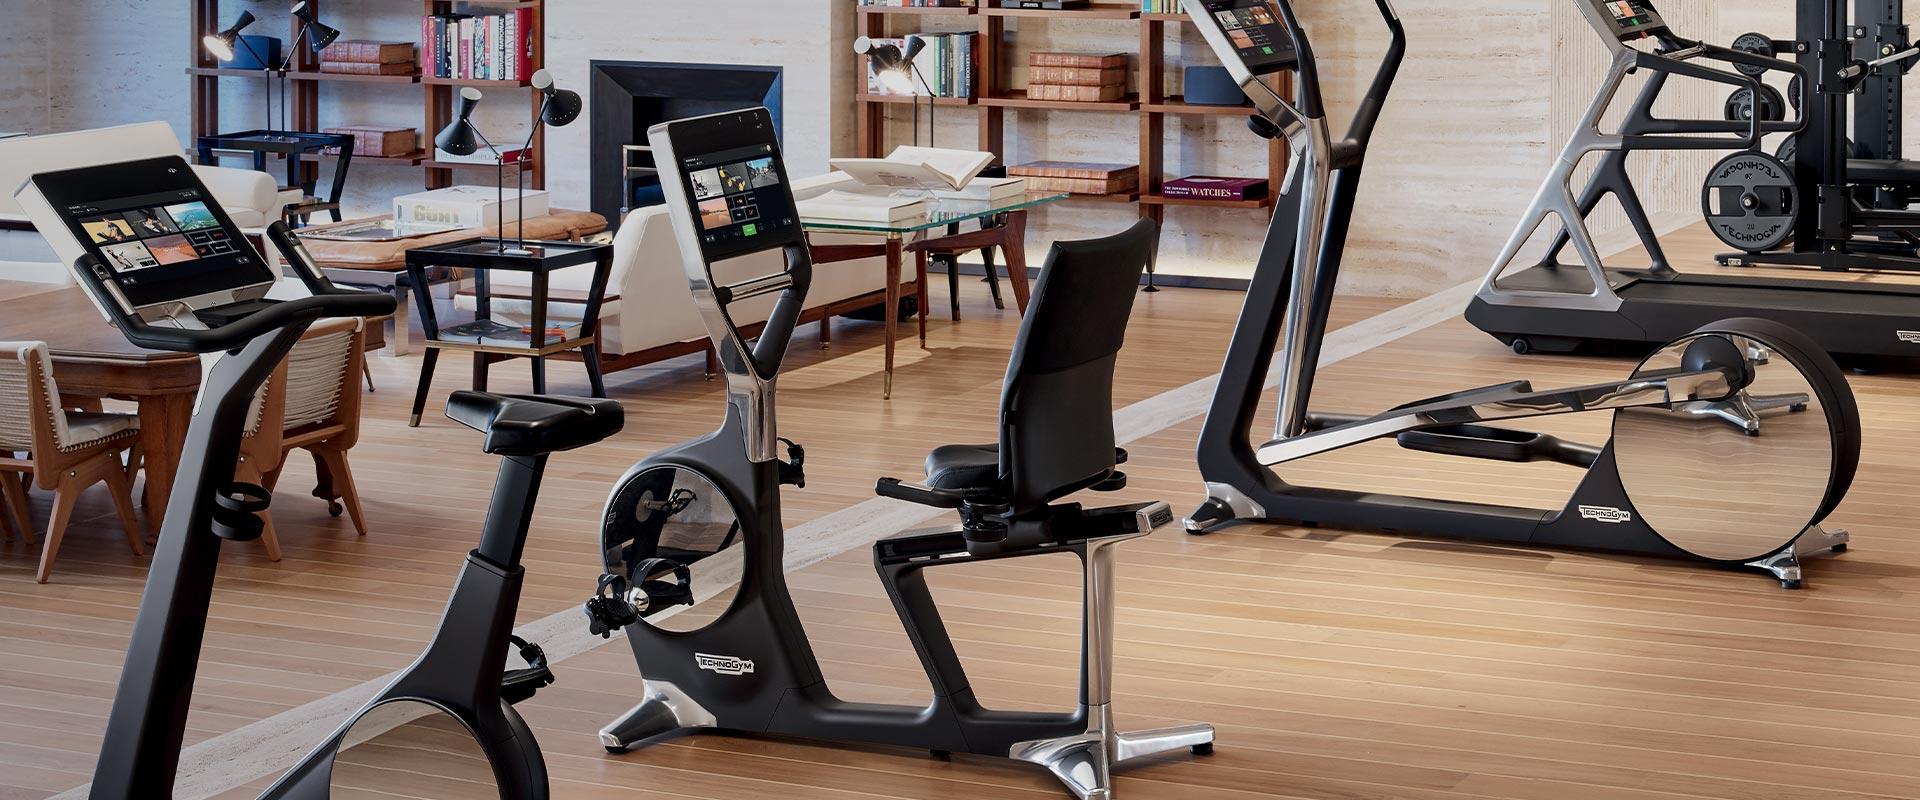  Technogym launches new MyRun and accelerates Home fitness revenues growth